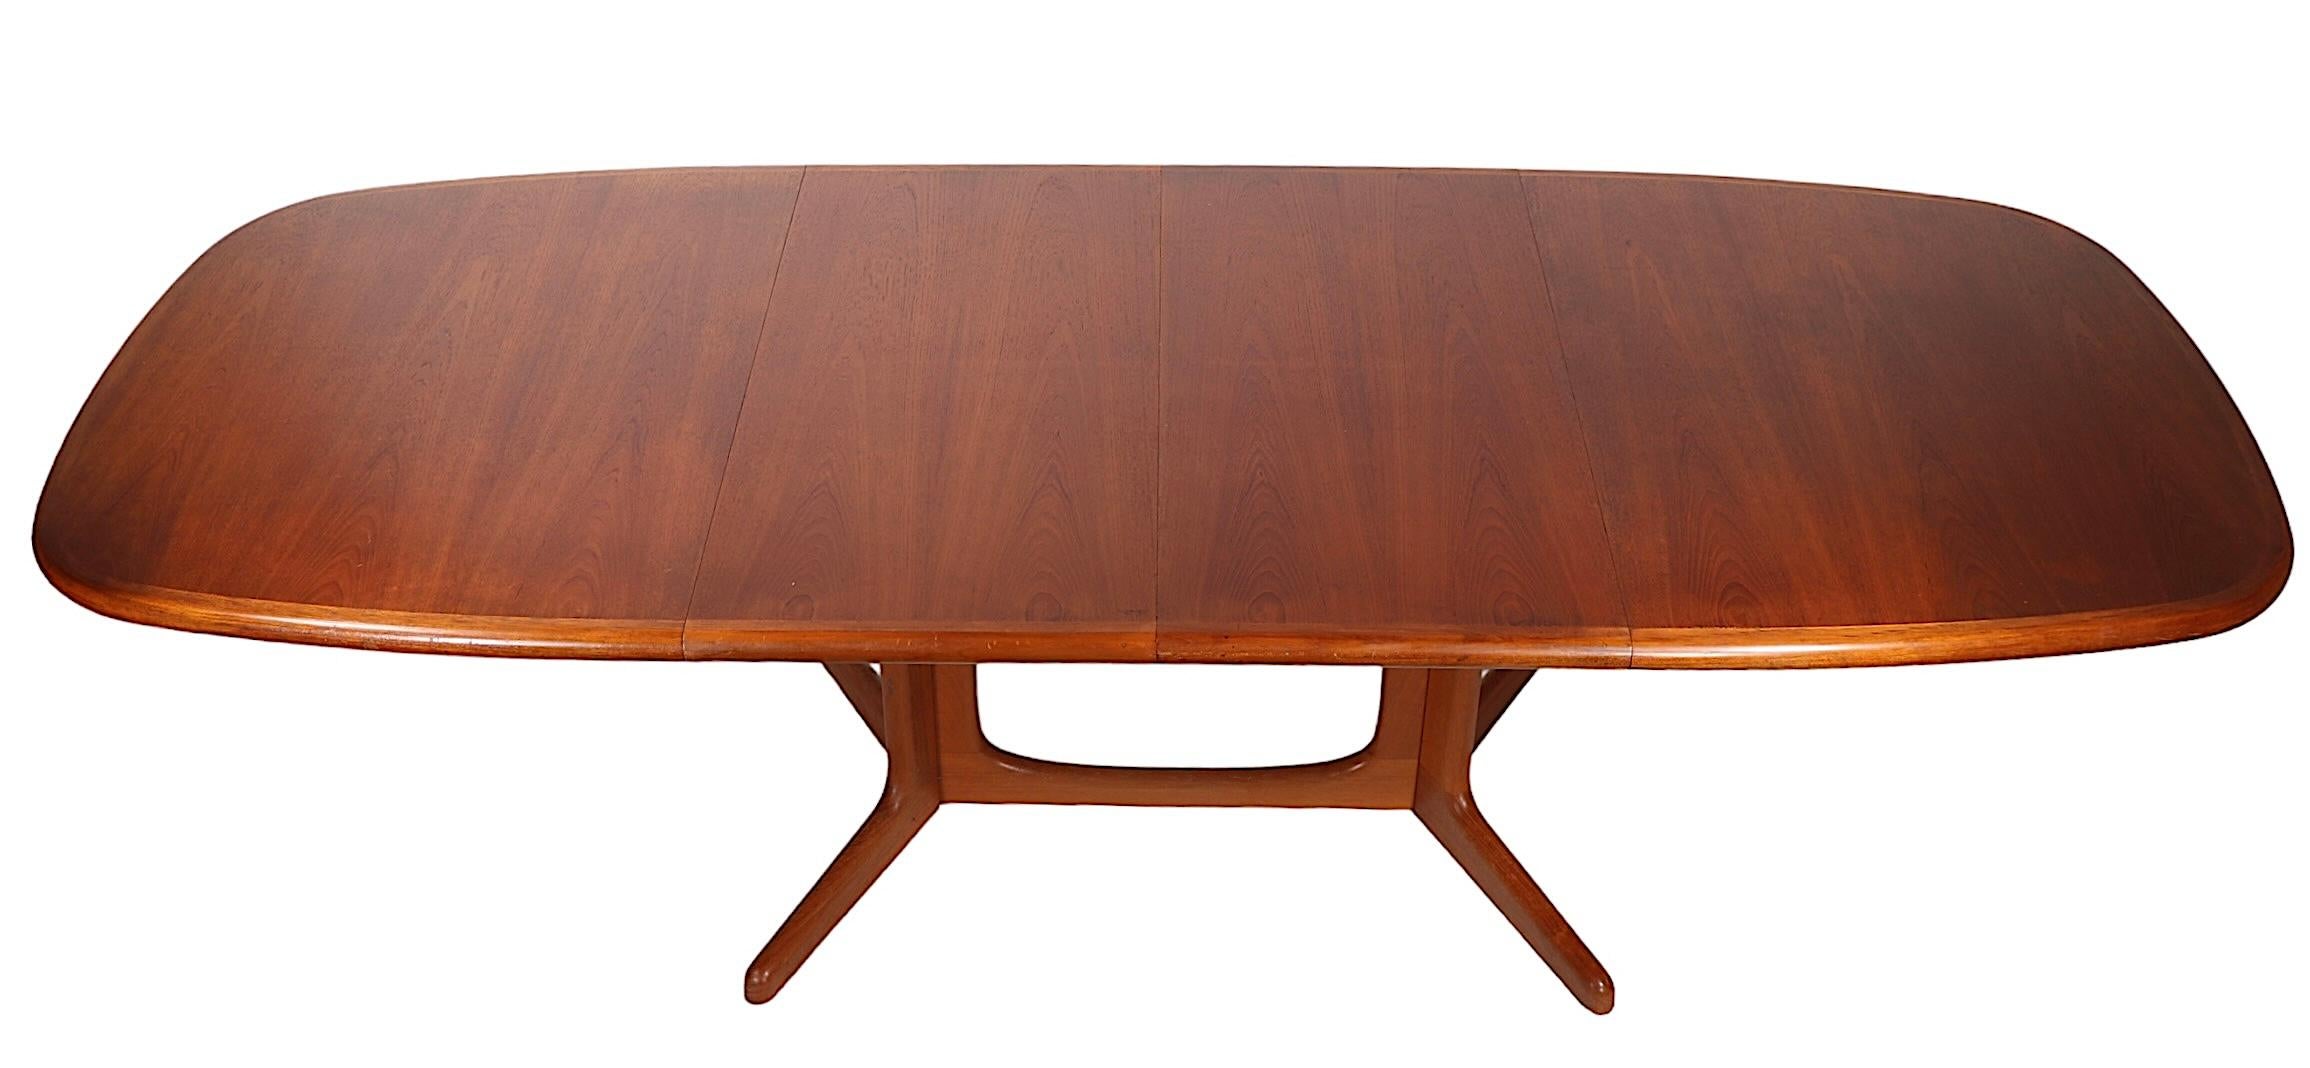 Danish Mid Century Oval Teak Dining Table by Niels Otto Moller for Gudme c 1970s For Sale 7